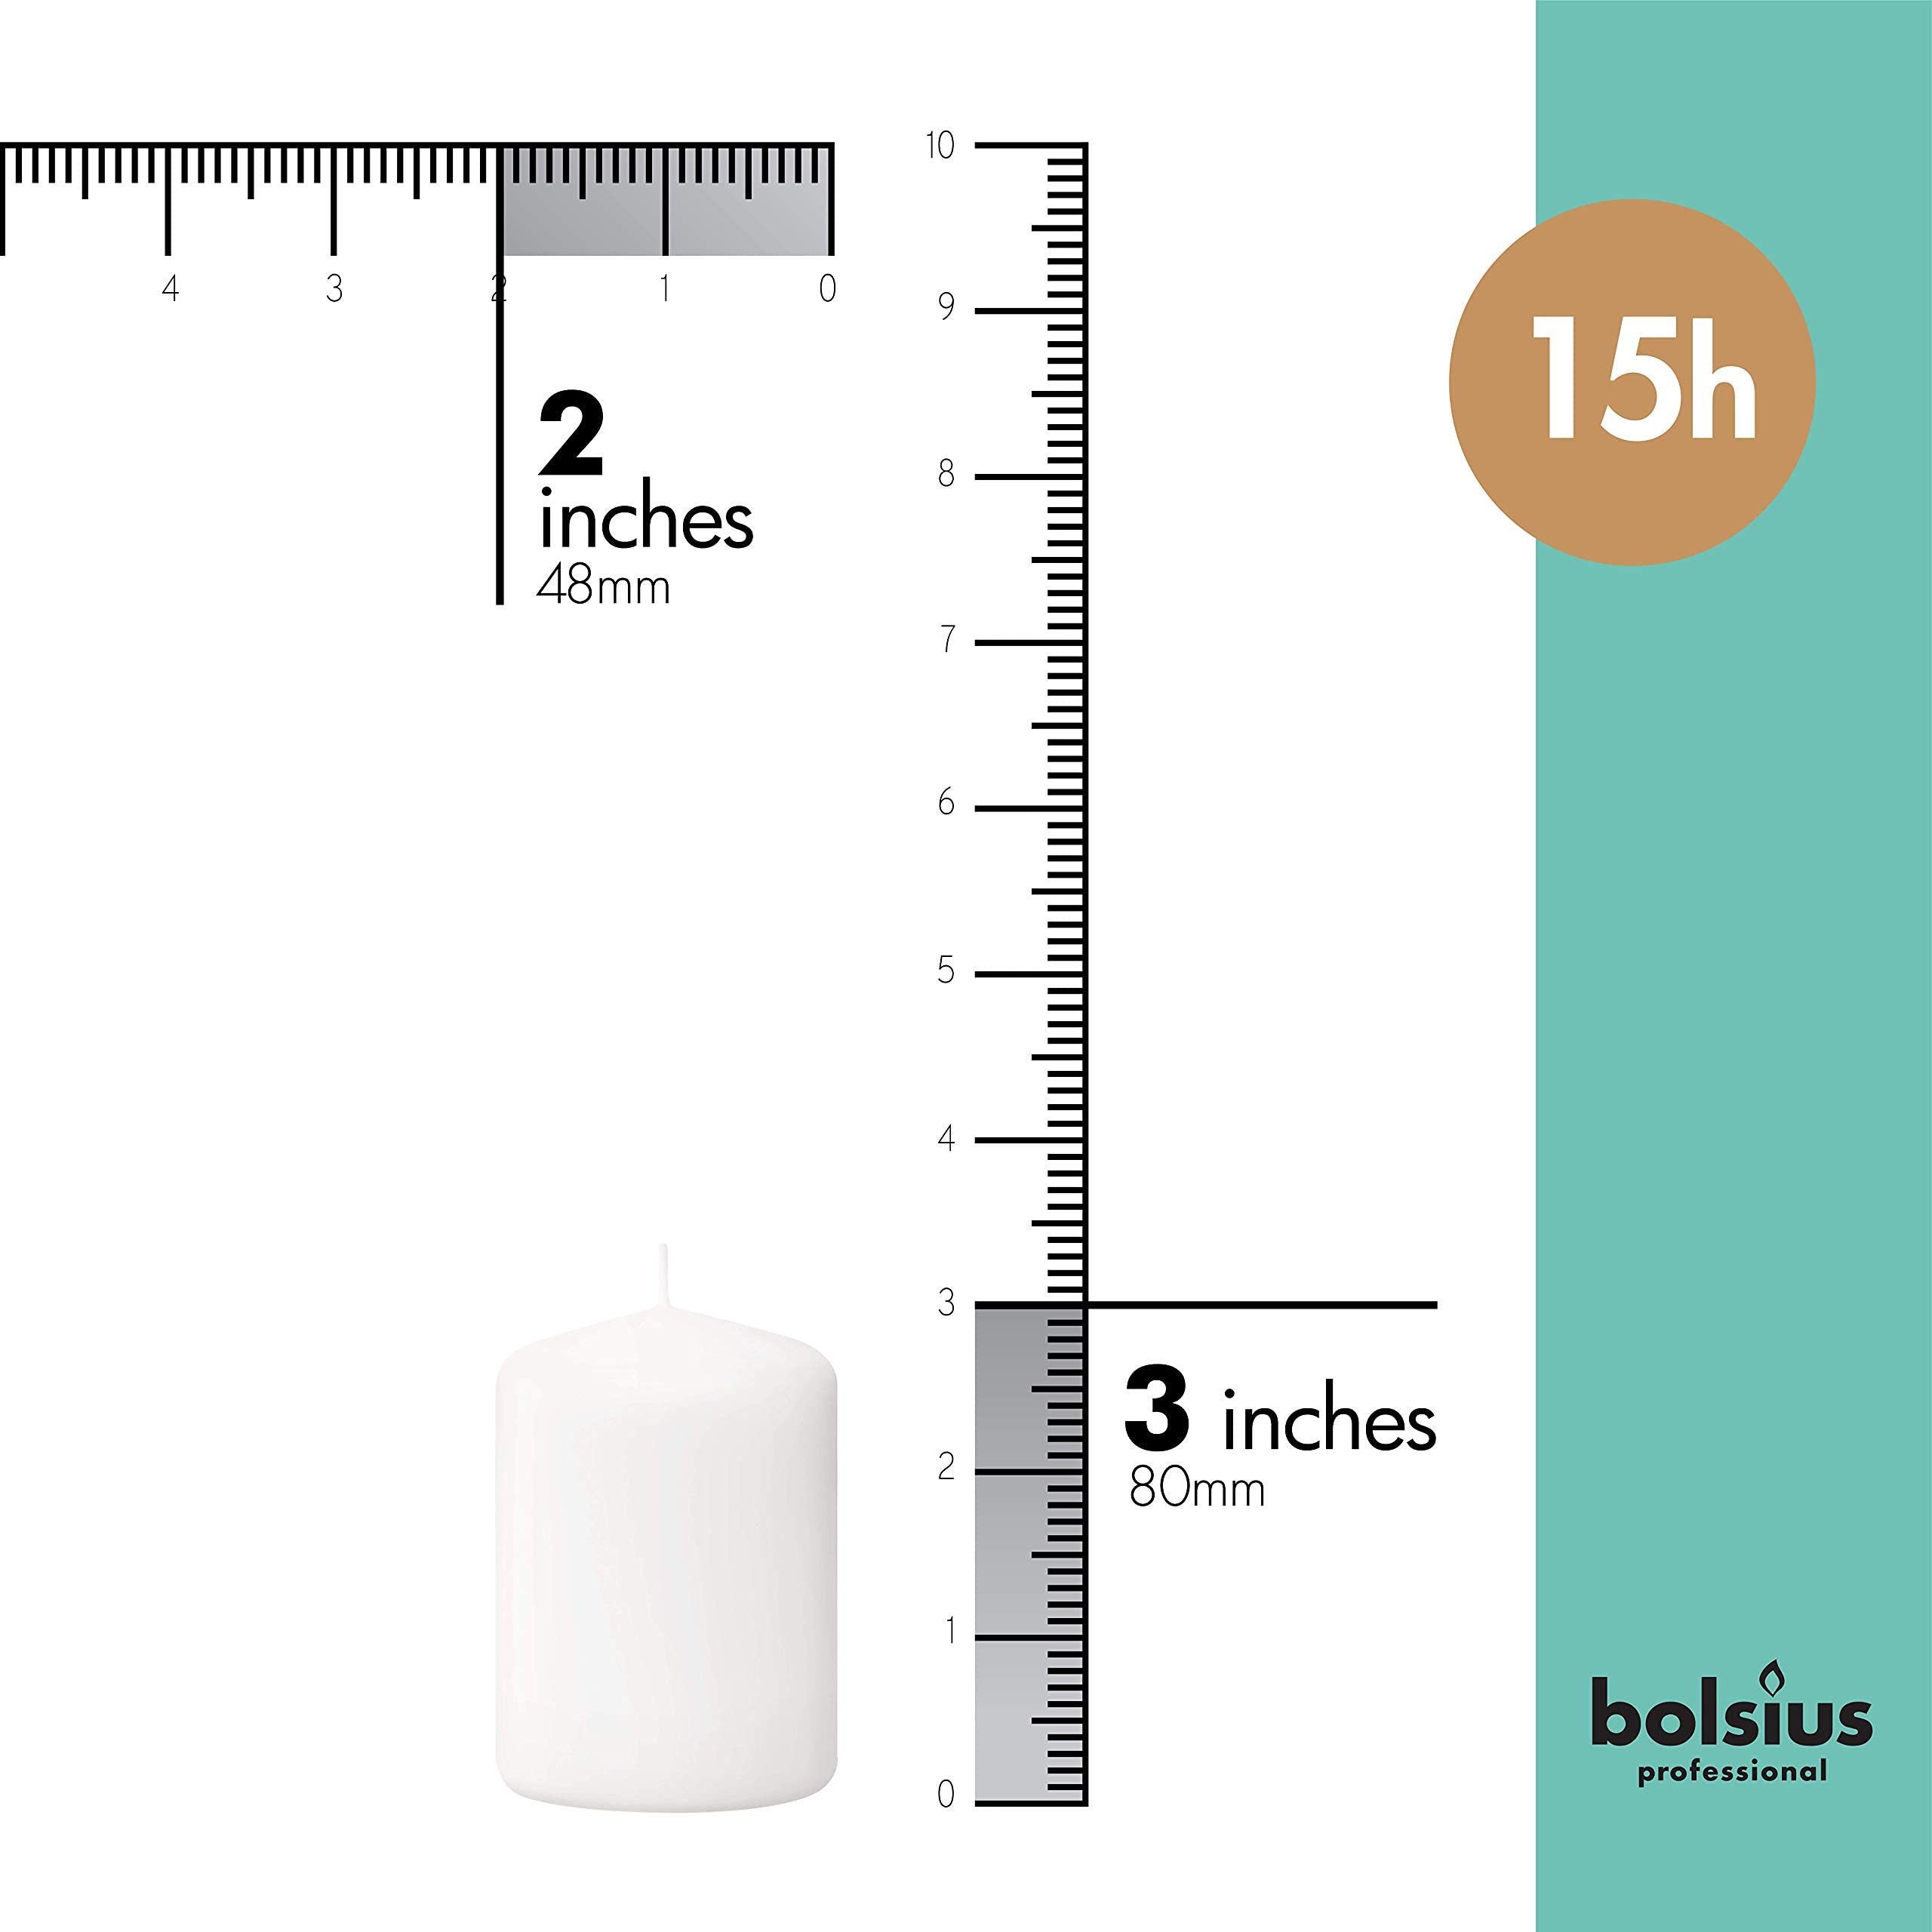 Bolsius White Pillar Candles – Unscented Candle Set of 20 – Dripless, Smokeless, and Clean Burning Household Dinner Candles – Perfect for Weddings, Parties, Dinners – 20 Decorative Candles  - Acceptable